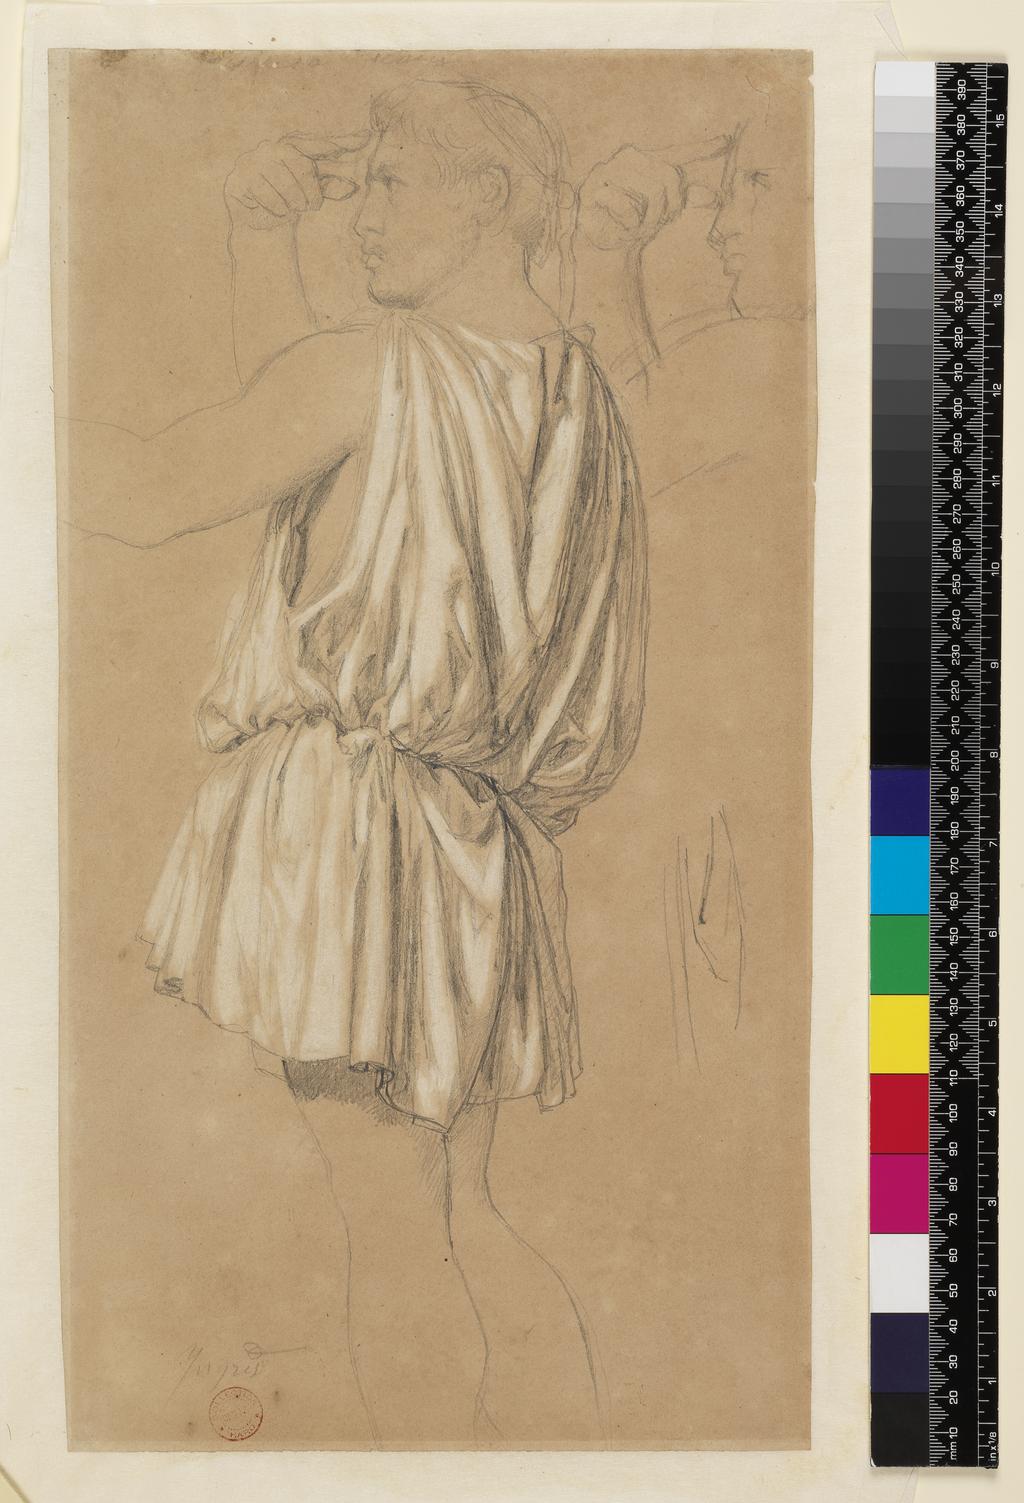 An image of Study for the figure of Phidias in 'The Apotheosis of Homer'. Ingres, Jean Auguste Dominique (French, 1780-1867). Graphite and bodycolour on buff paper, height 398 mm, width 213 mm.